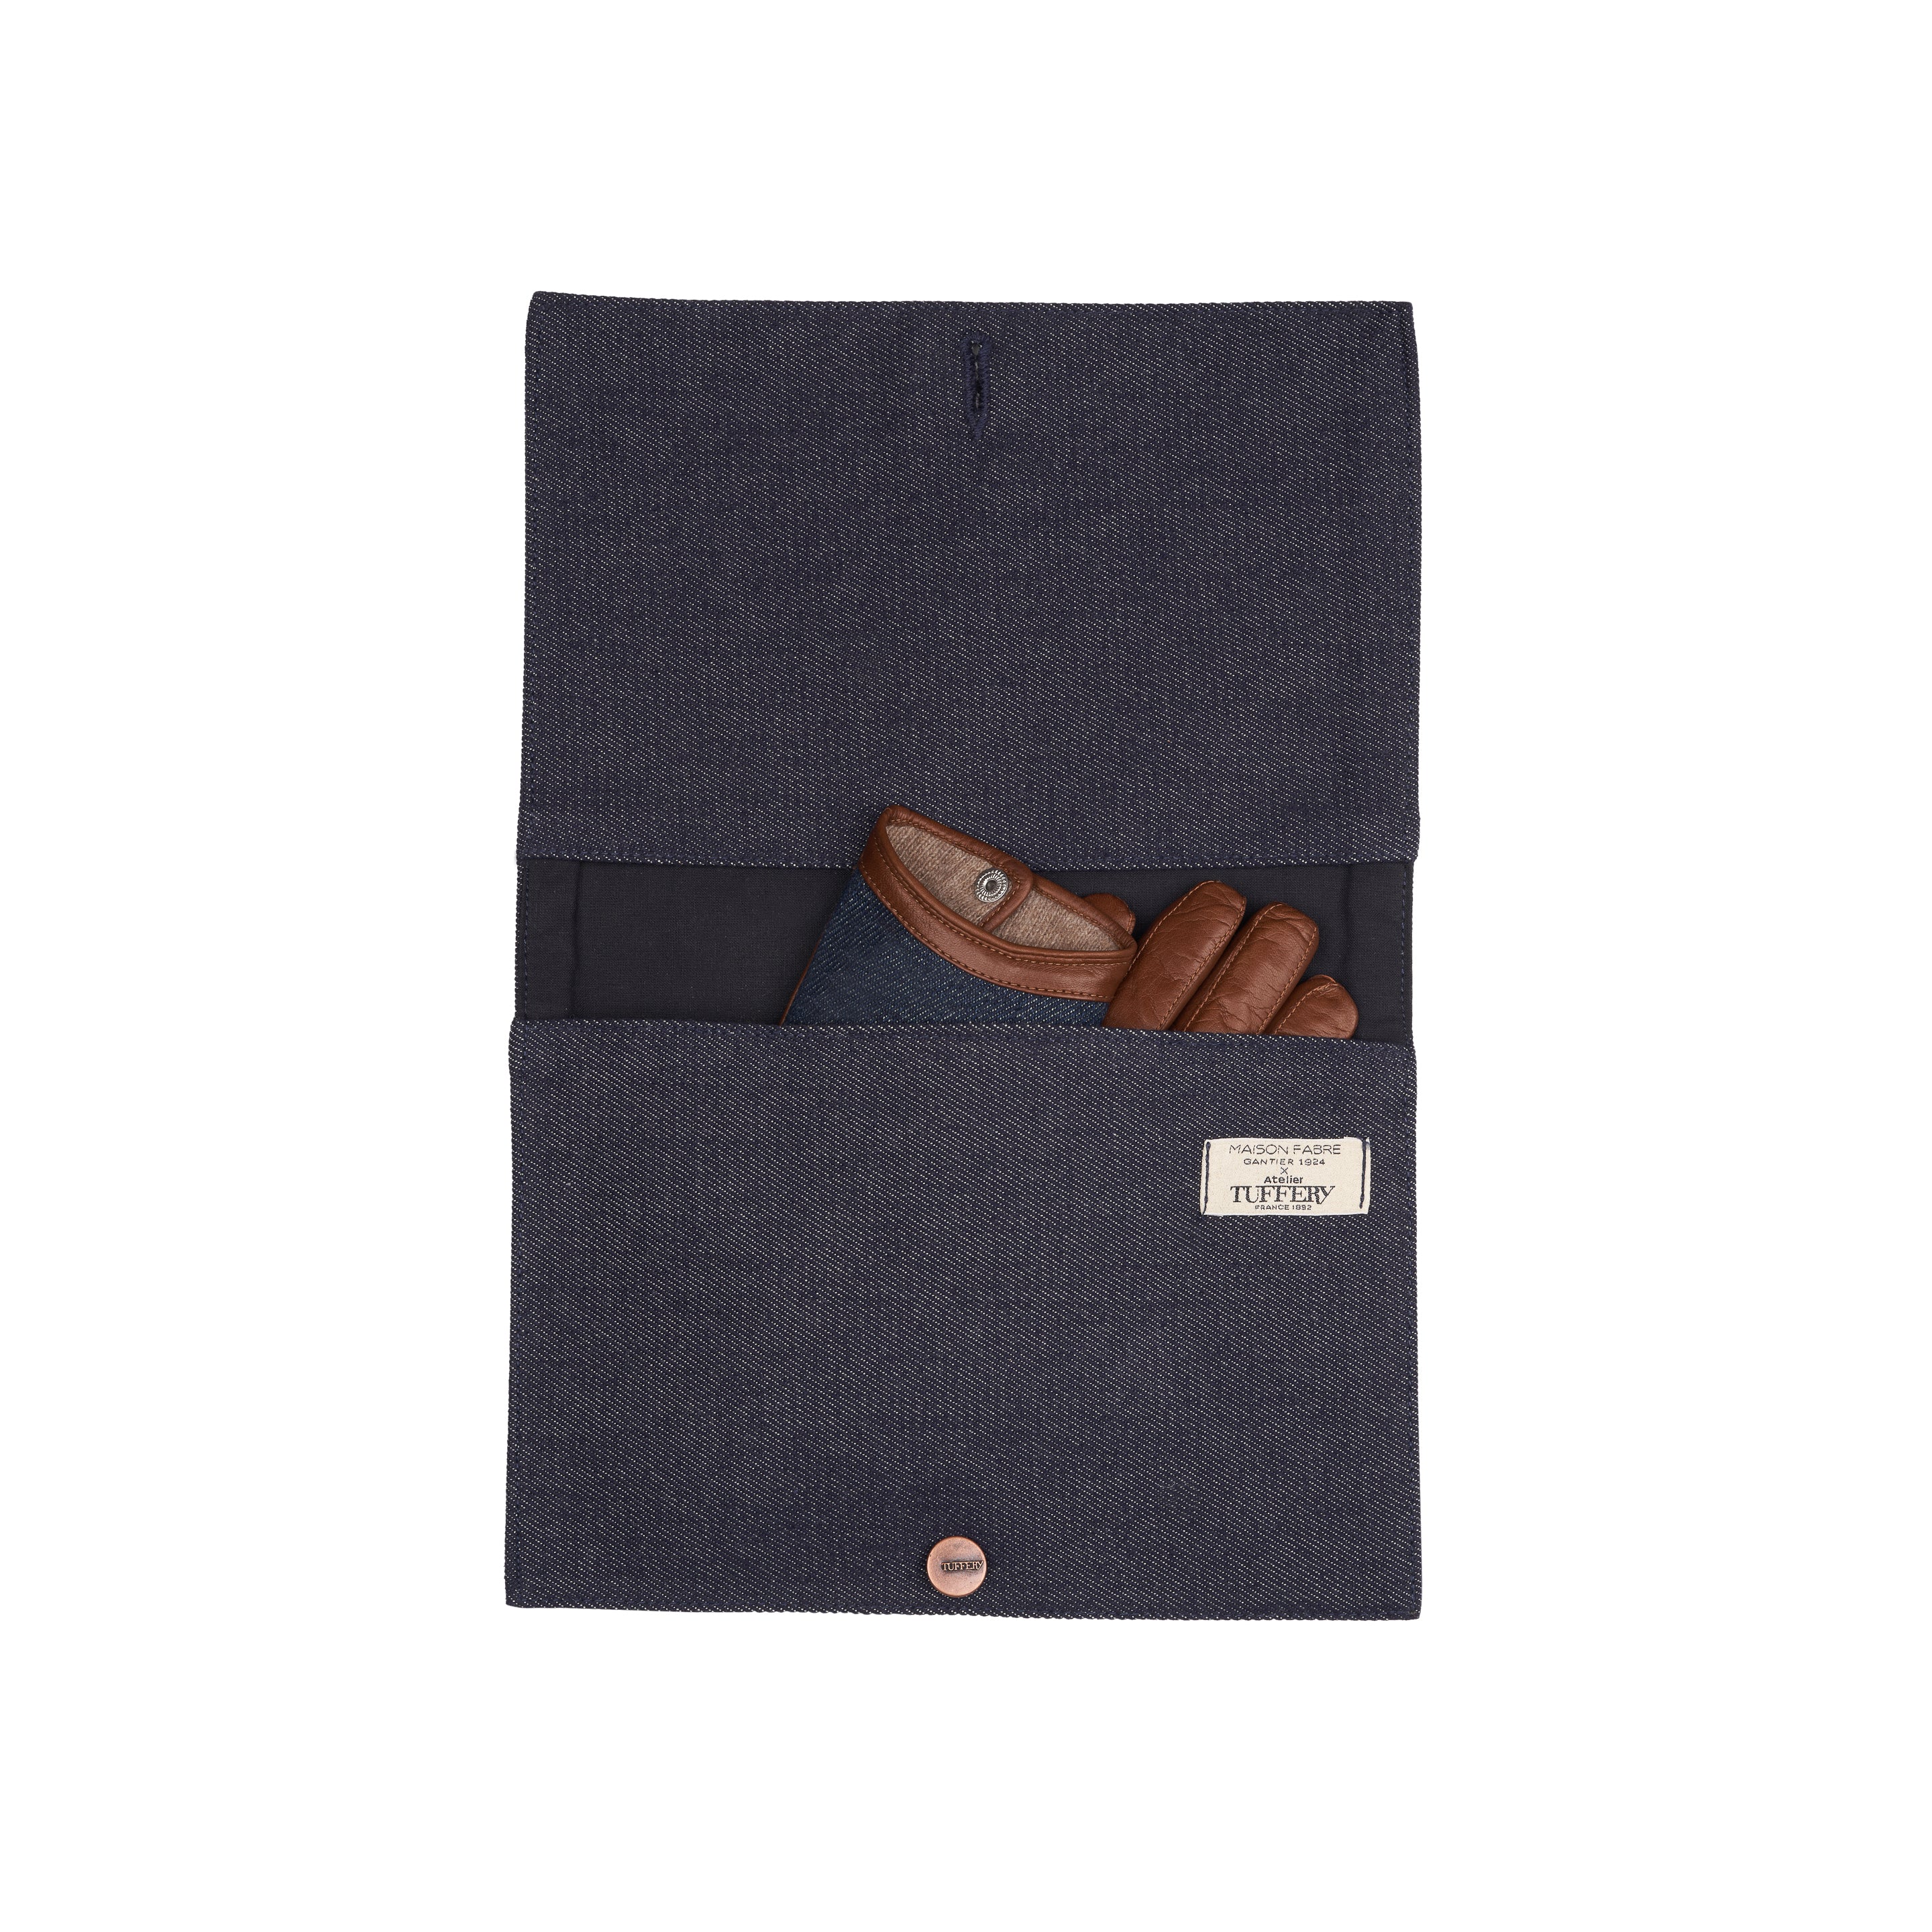 Men's brown leather gloves and cashmere-lined jeans – Atelier Tuffery